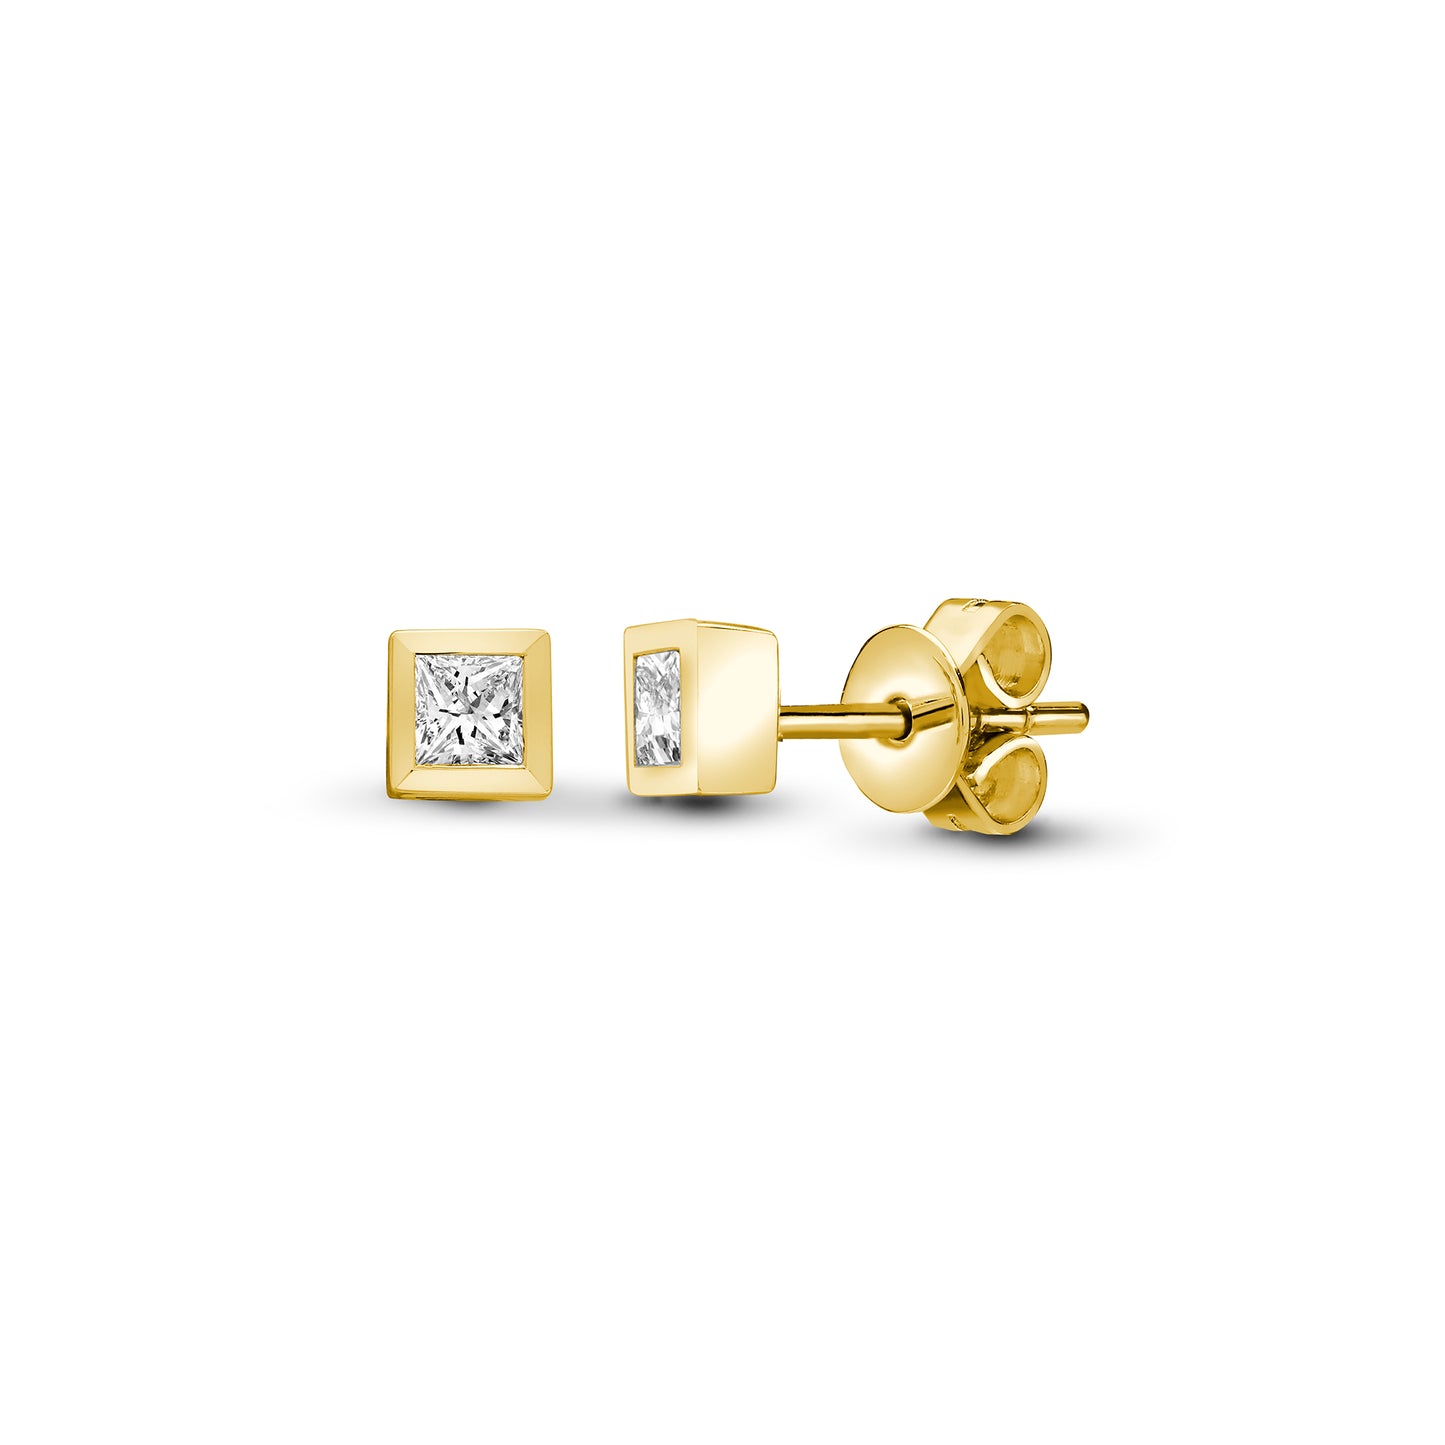 18ct Gold  0.4ct Diamond Solitaire Stud Earrings - 18E121-040